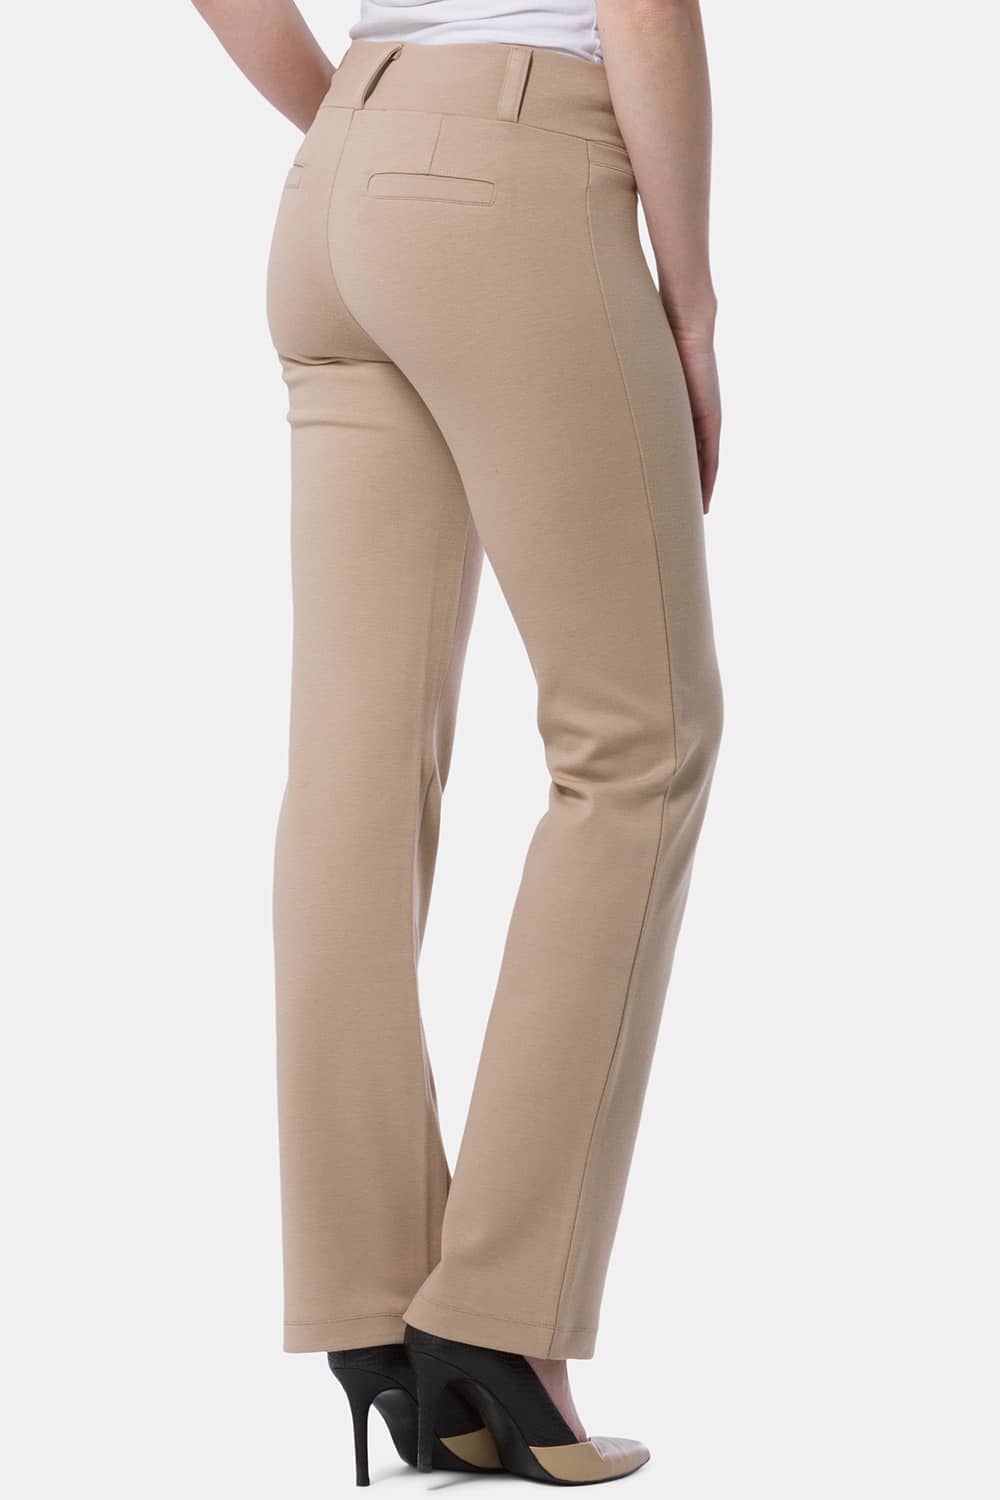 Women's Ponte Knit Pull-On Boot Leg Work Pant - NEW & IMPROVED FIT Womens>Pants Fishers Finery 